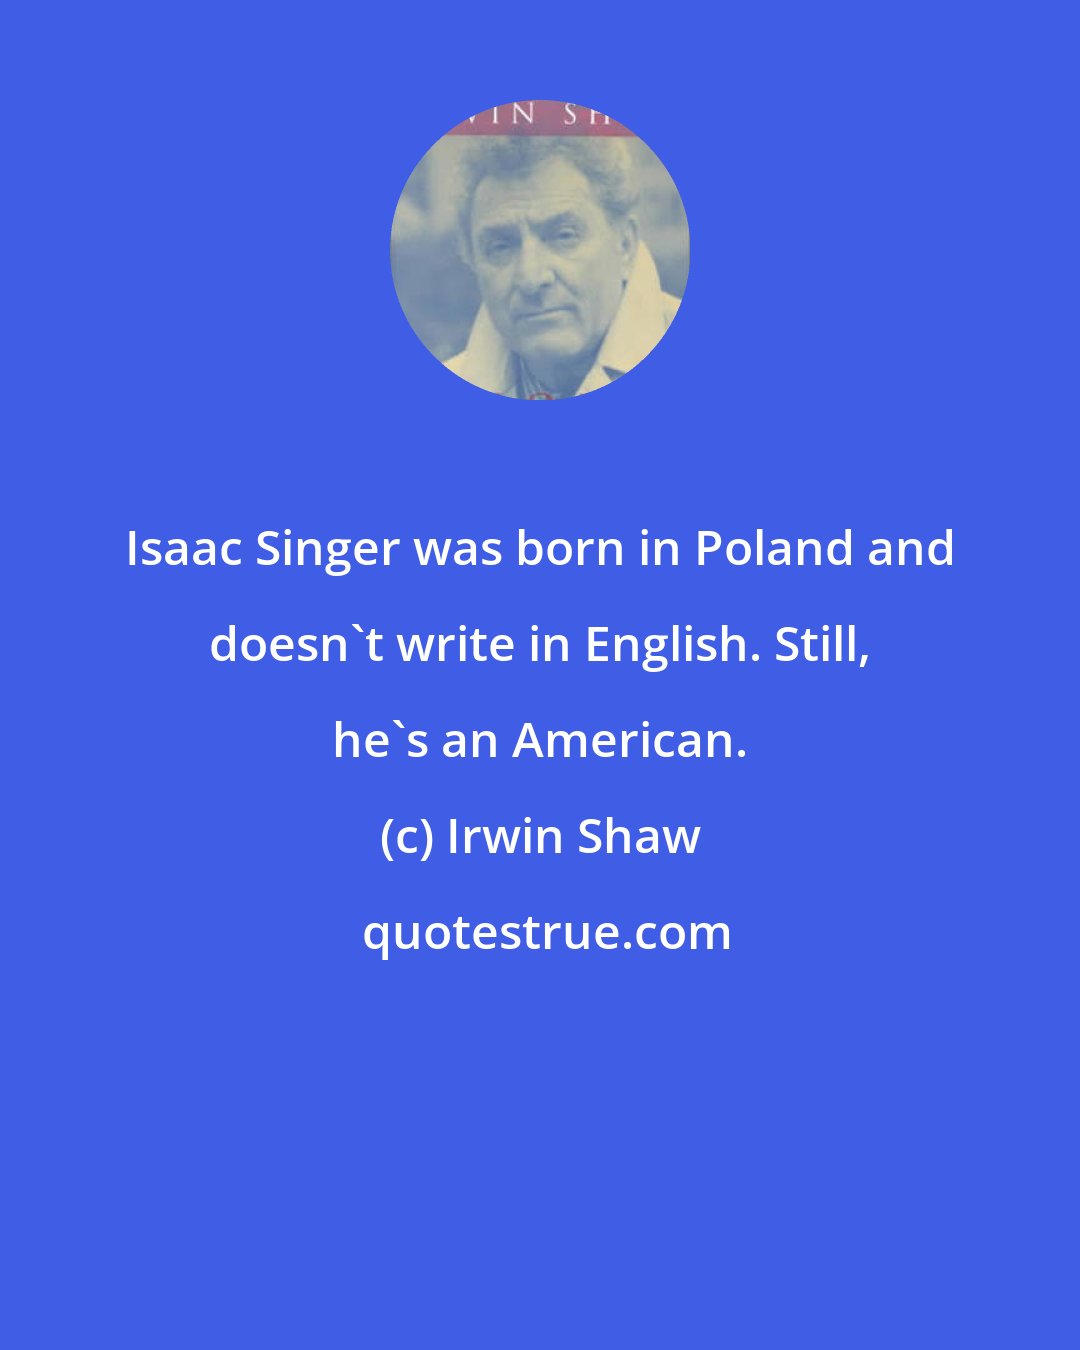 Irwin Shaw: Isaac Singer was born in Poland and doesn't write in English. Still, he's an American.